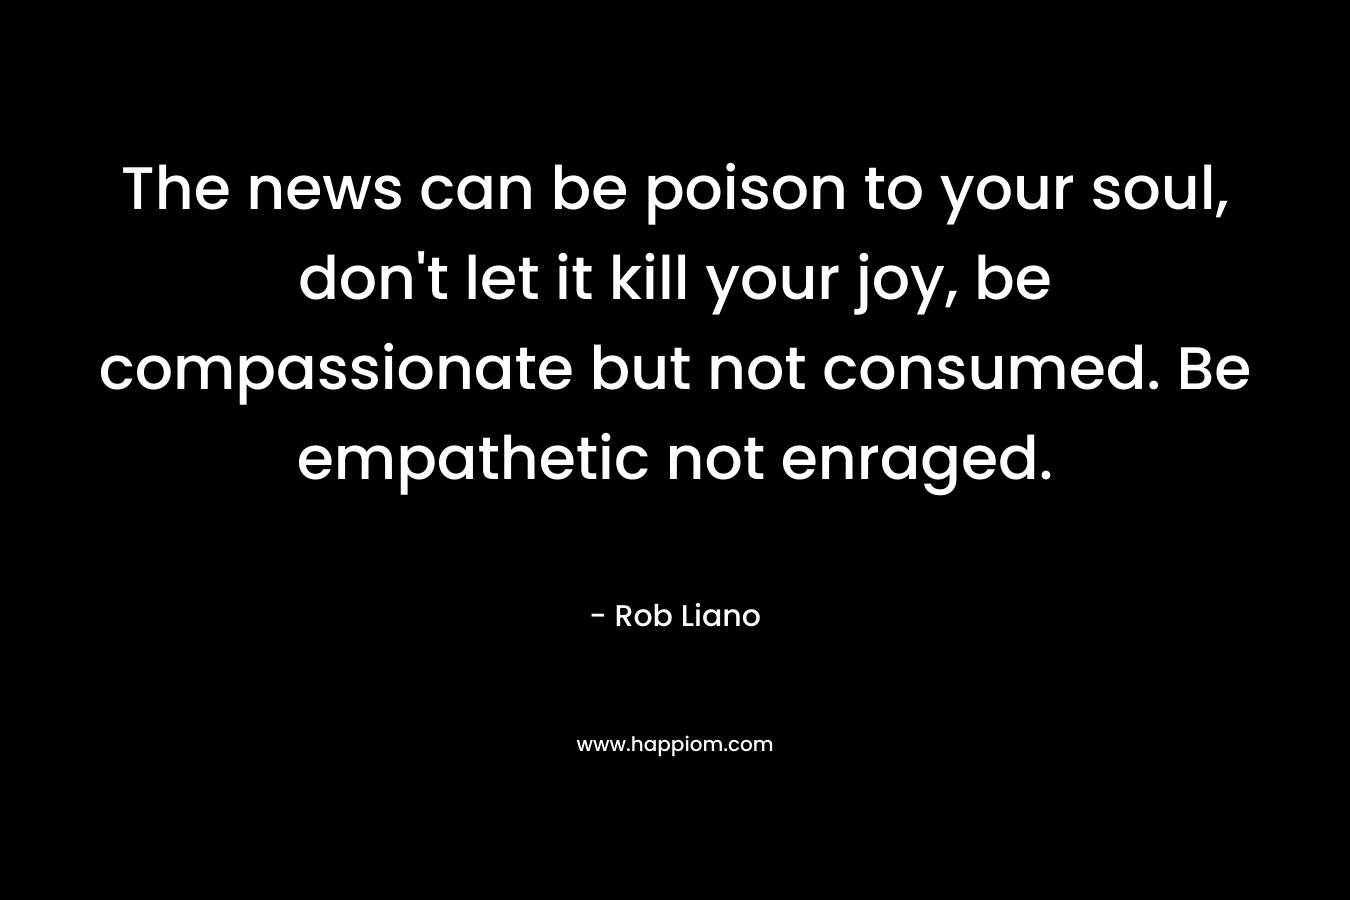 The news can be poison to your soul, don't let it kill your joy, be compassionate but not consumed. Be empathetic not enraged.